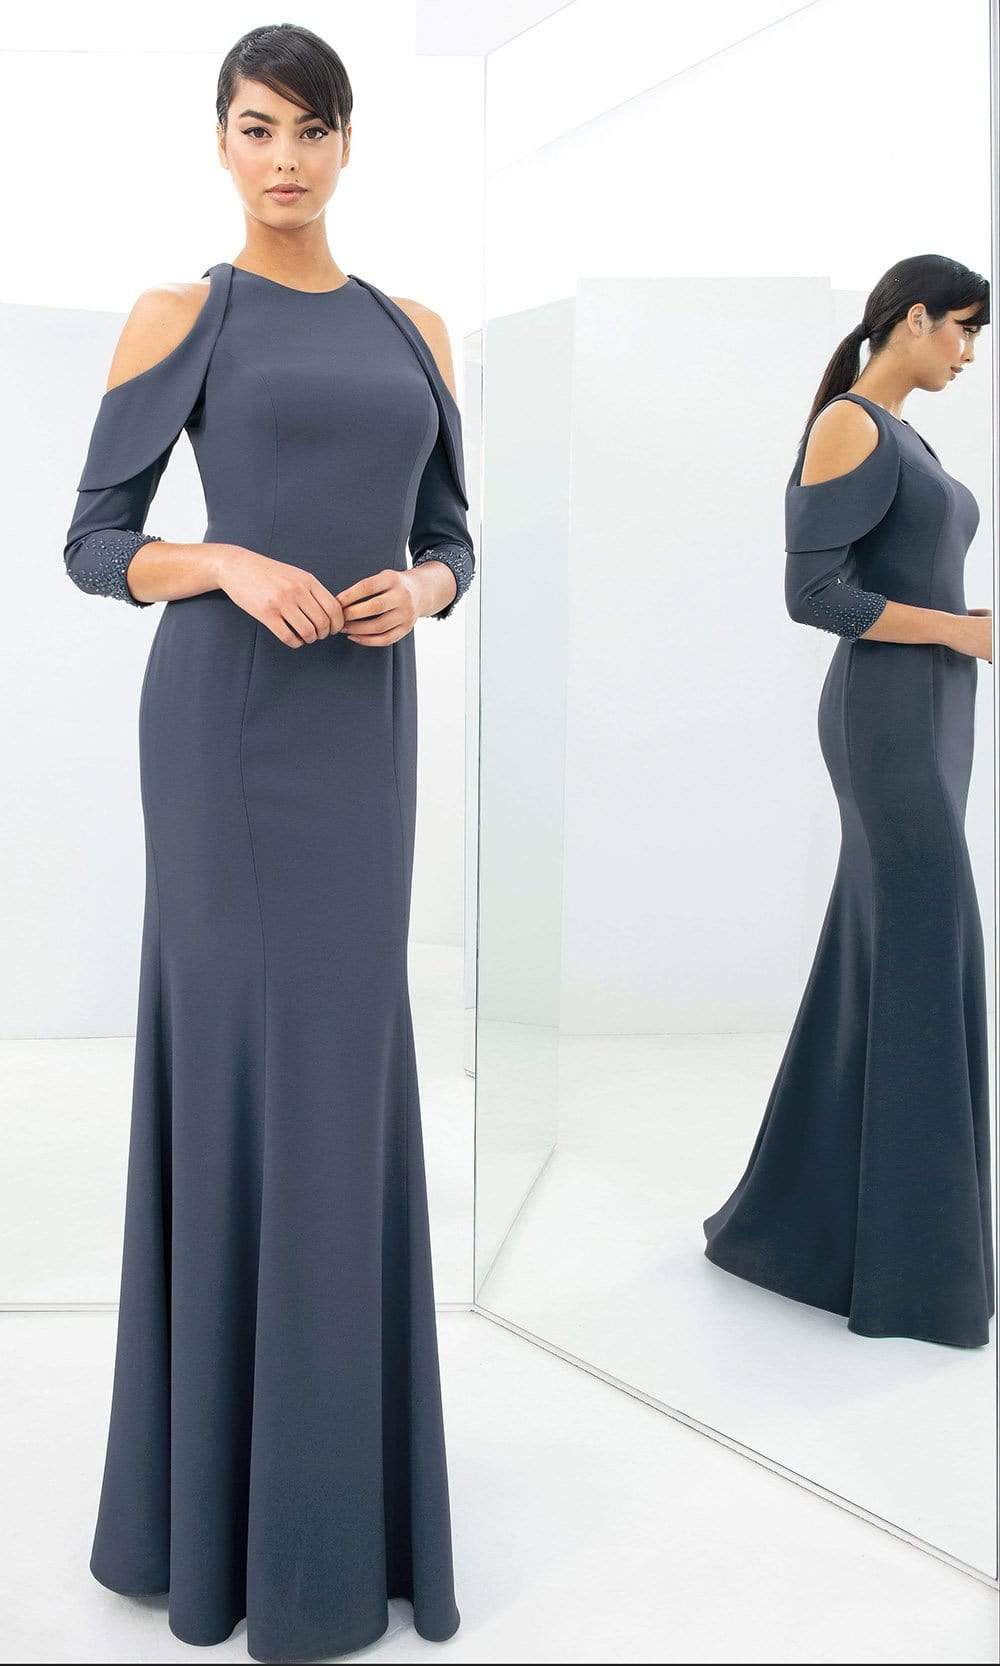 Alexander By Daymor - 1351 Fitted Mermaid Gown With Cold Shoulders Mother of the Bride Dresses 00 / Graphite